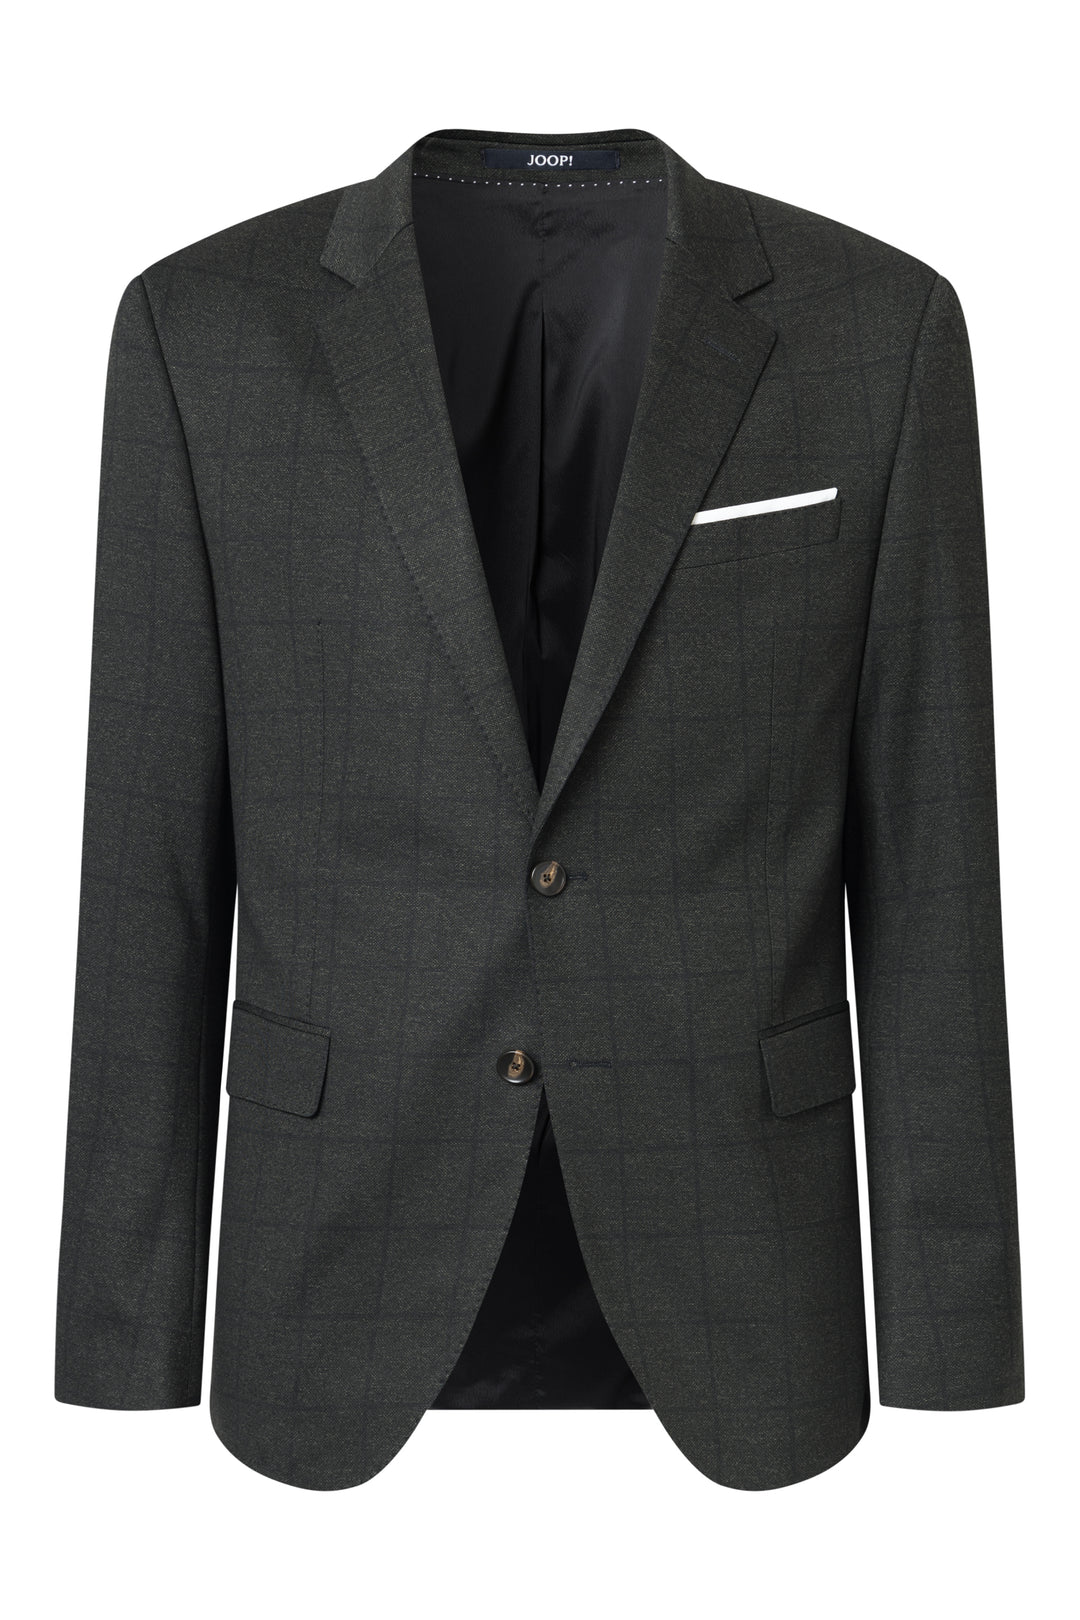 Herby Modular Sportcoat in Green Check